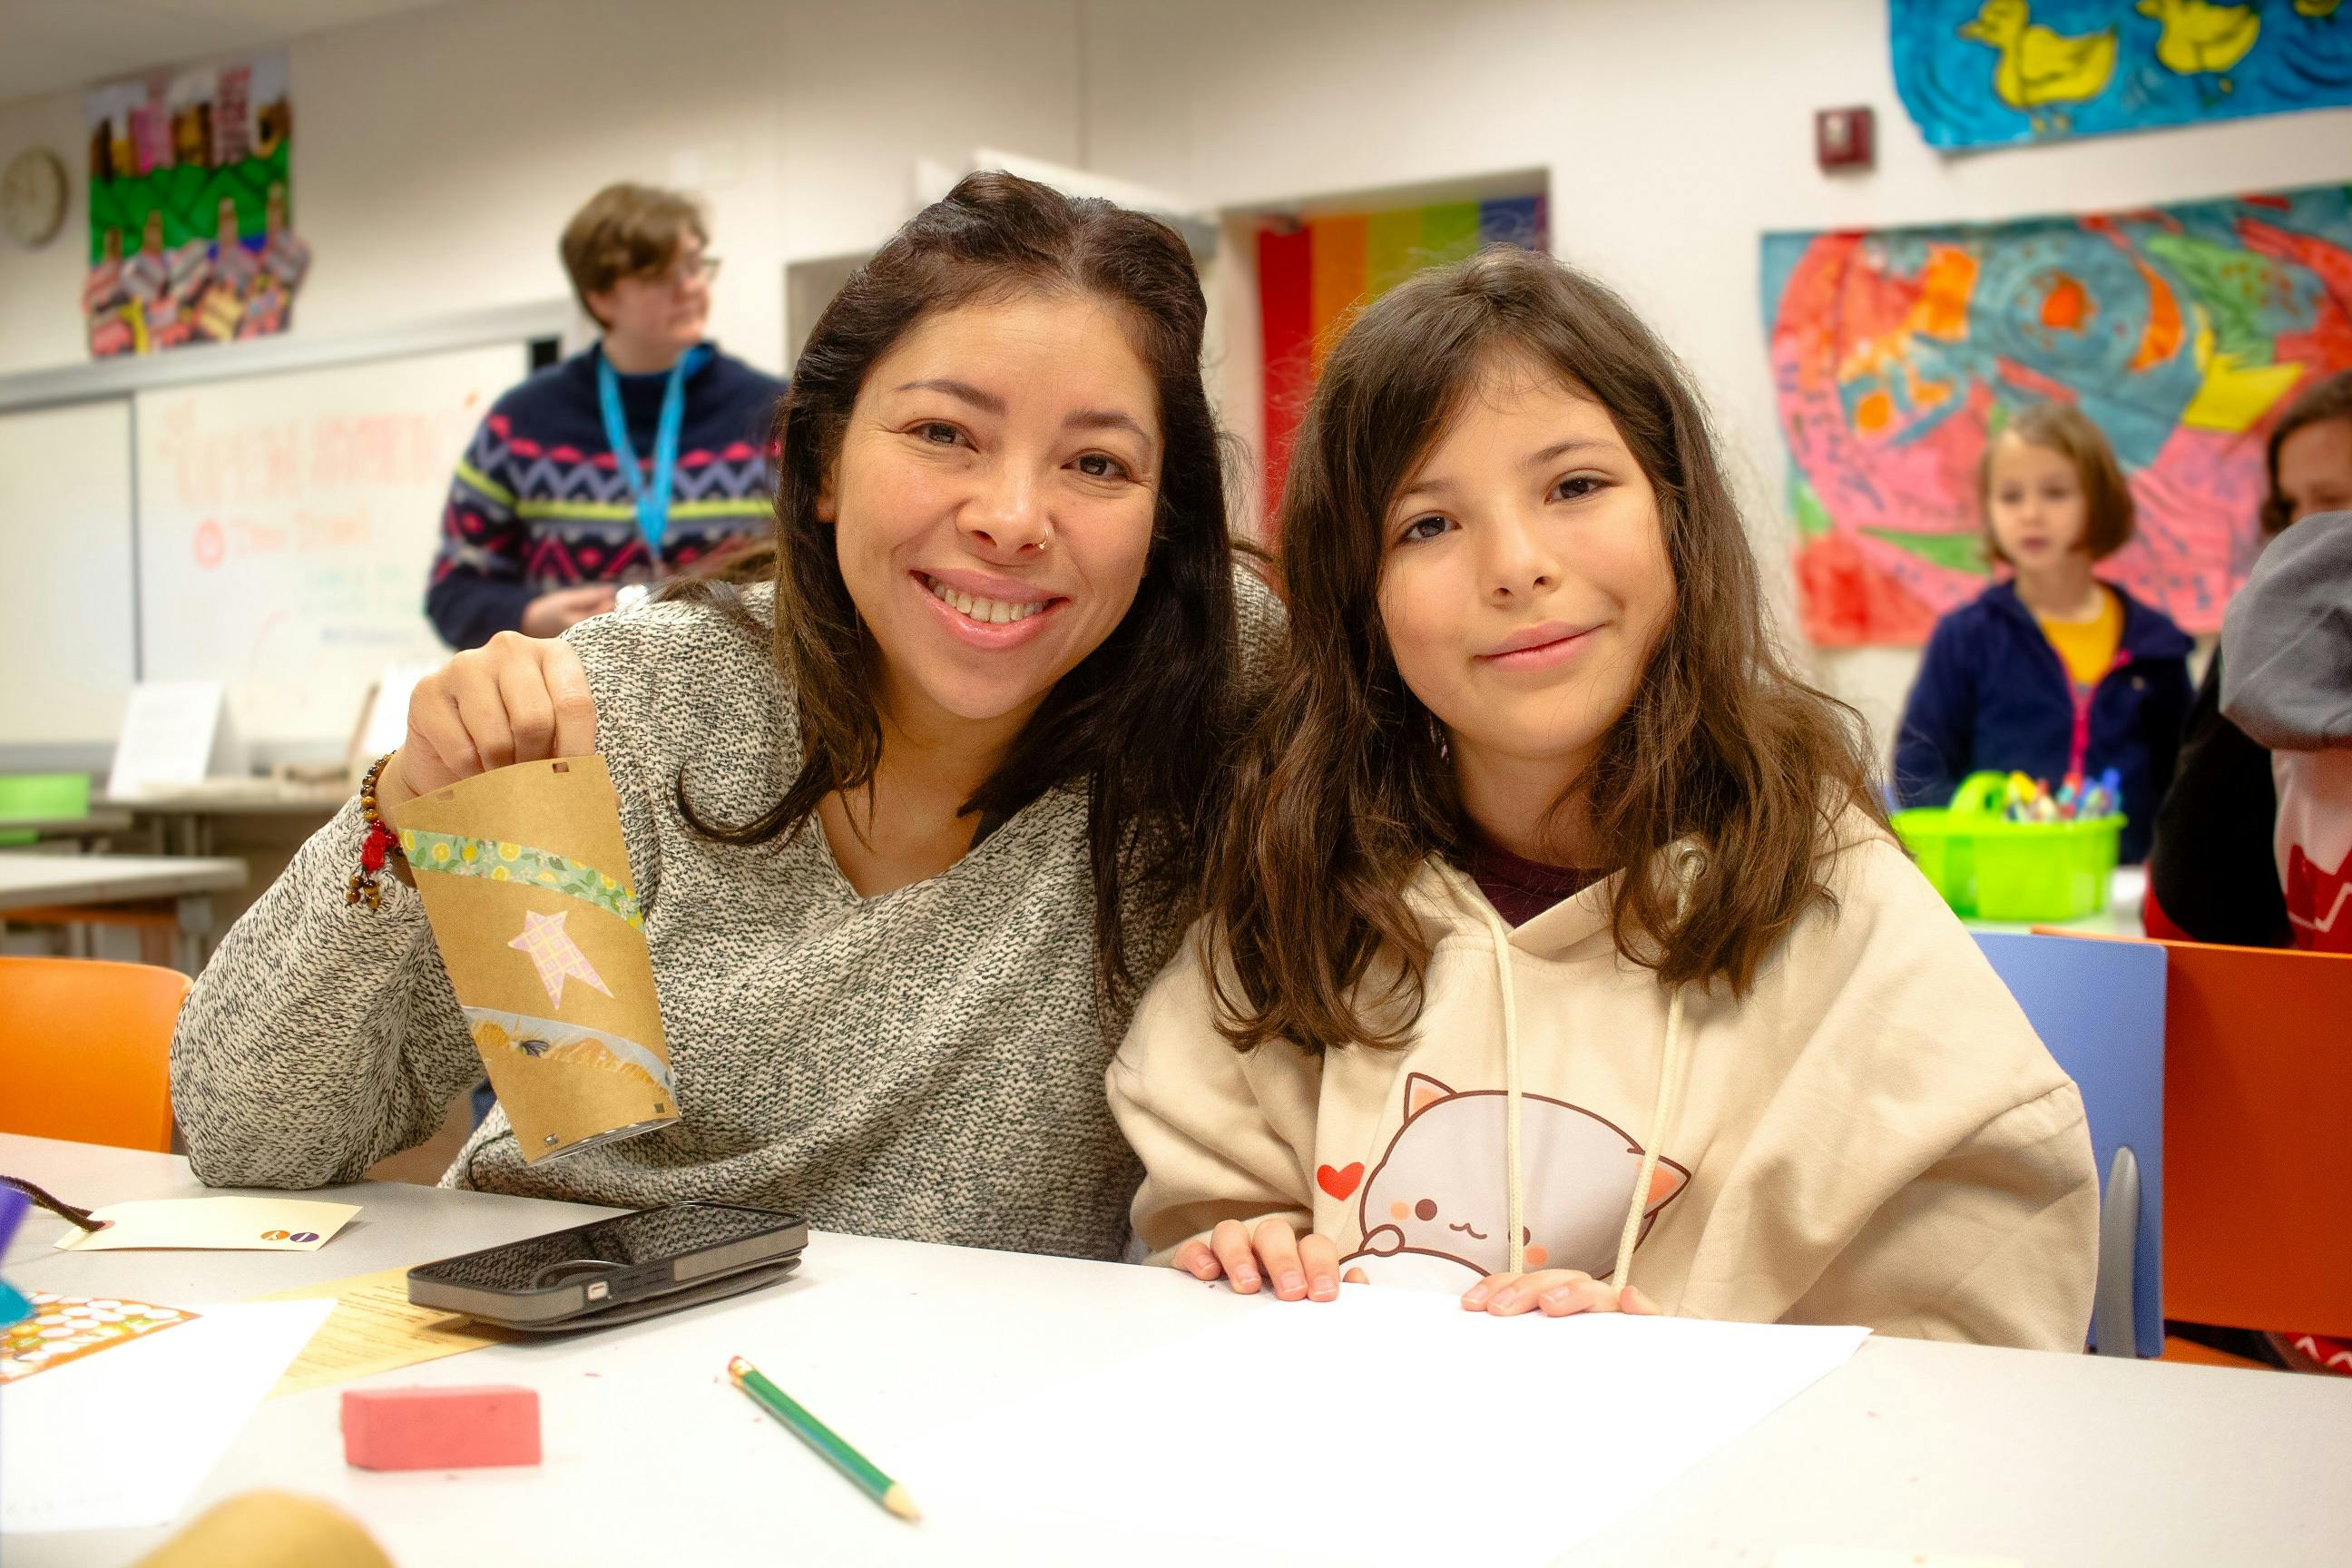 Woman and child sitting in art classroom holding up art project